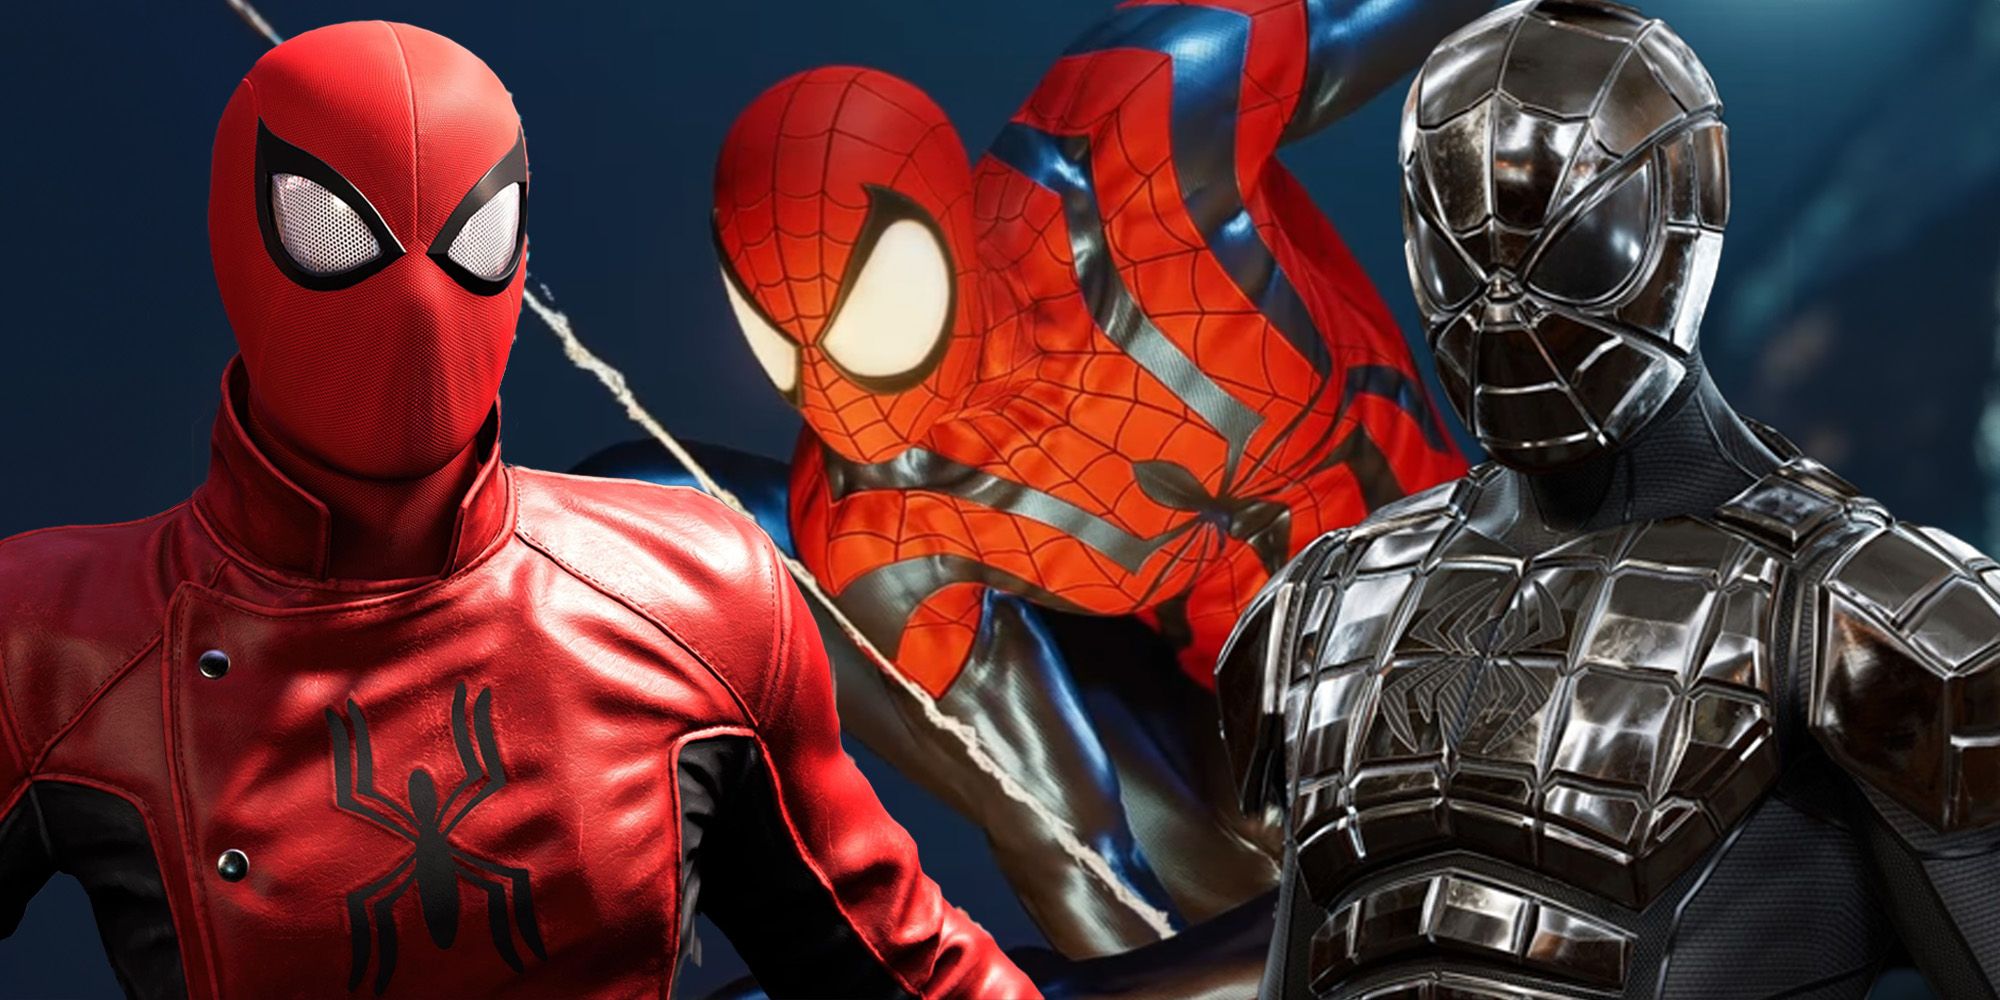 Spider-Man's Last Stand and Spider-Armor suits from Marvel's Spider-Man with the Sensational Spider-Man Ben Reilly mod suit behind them